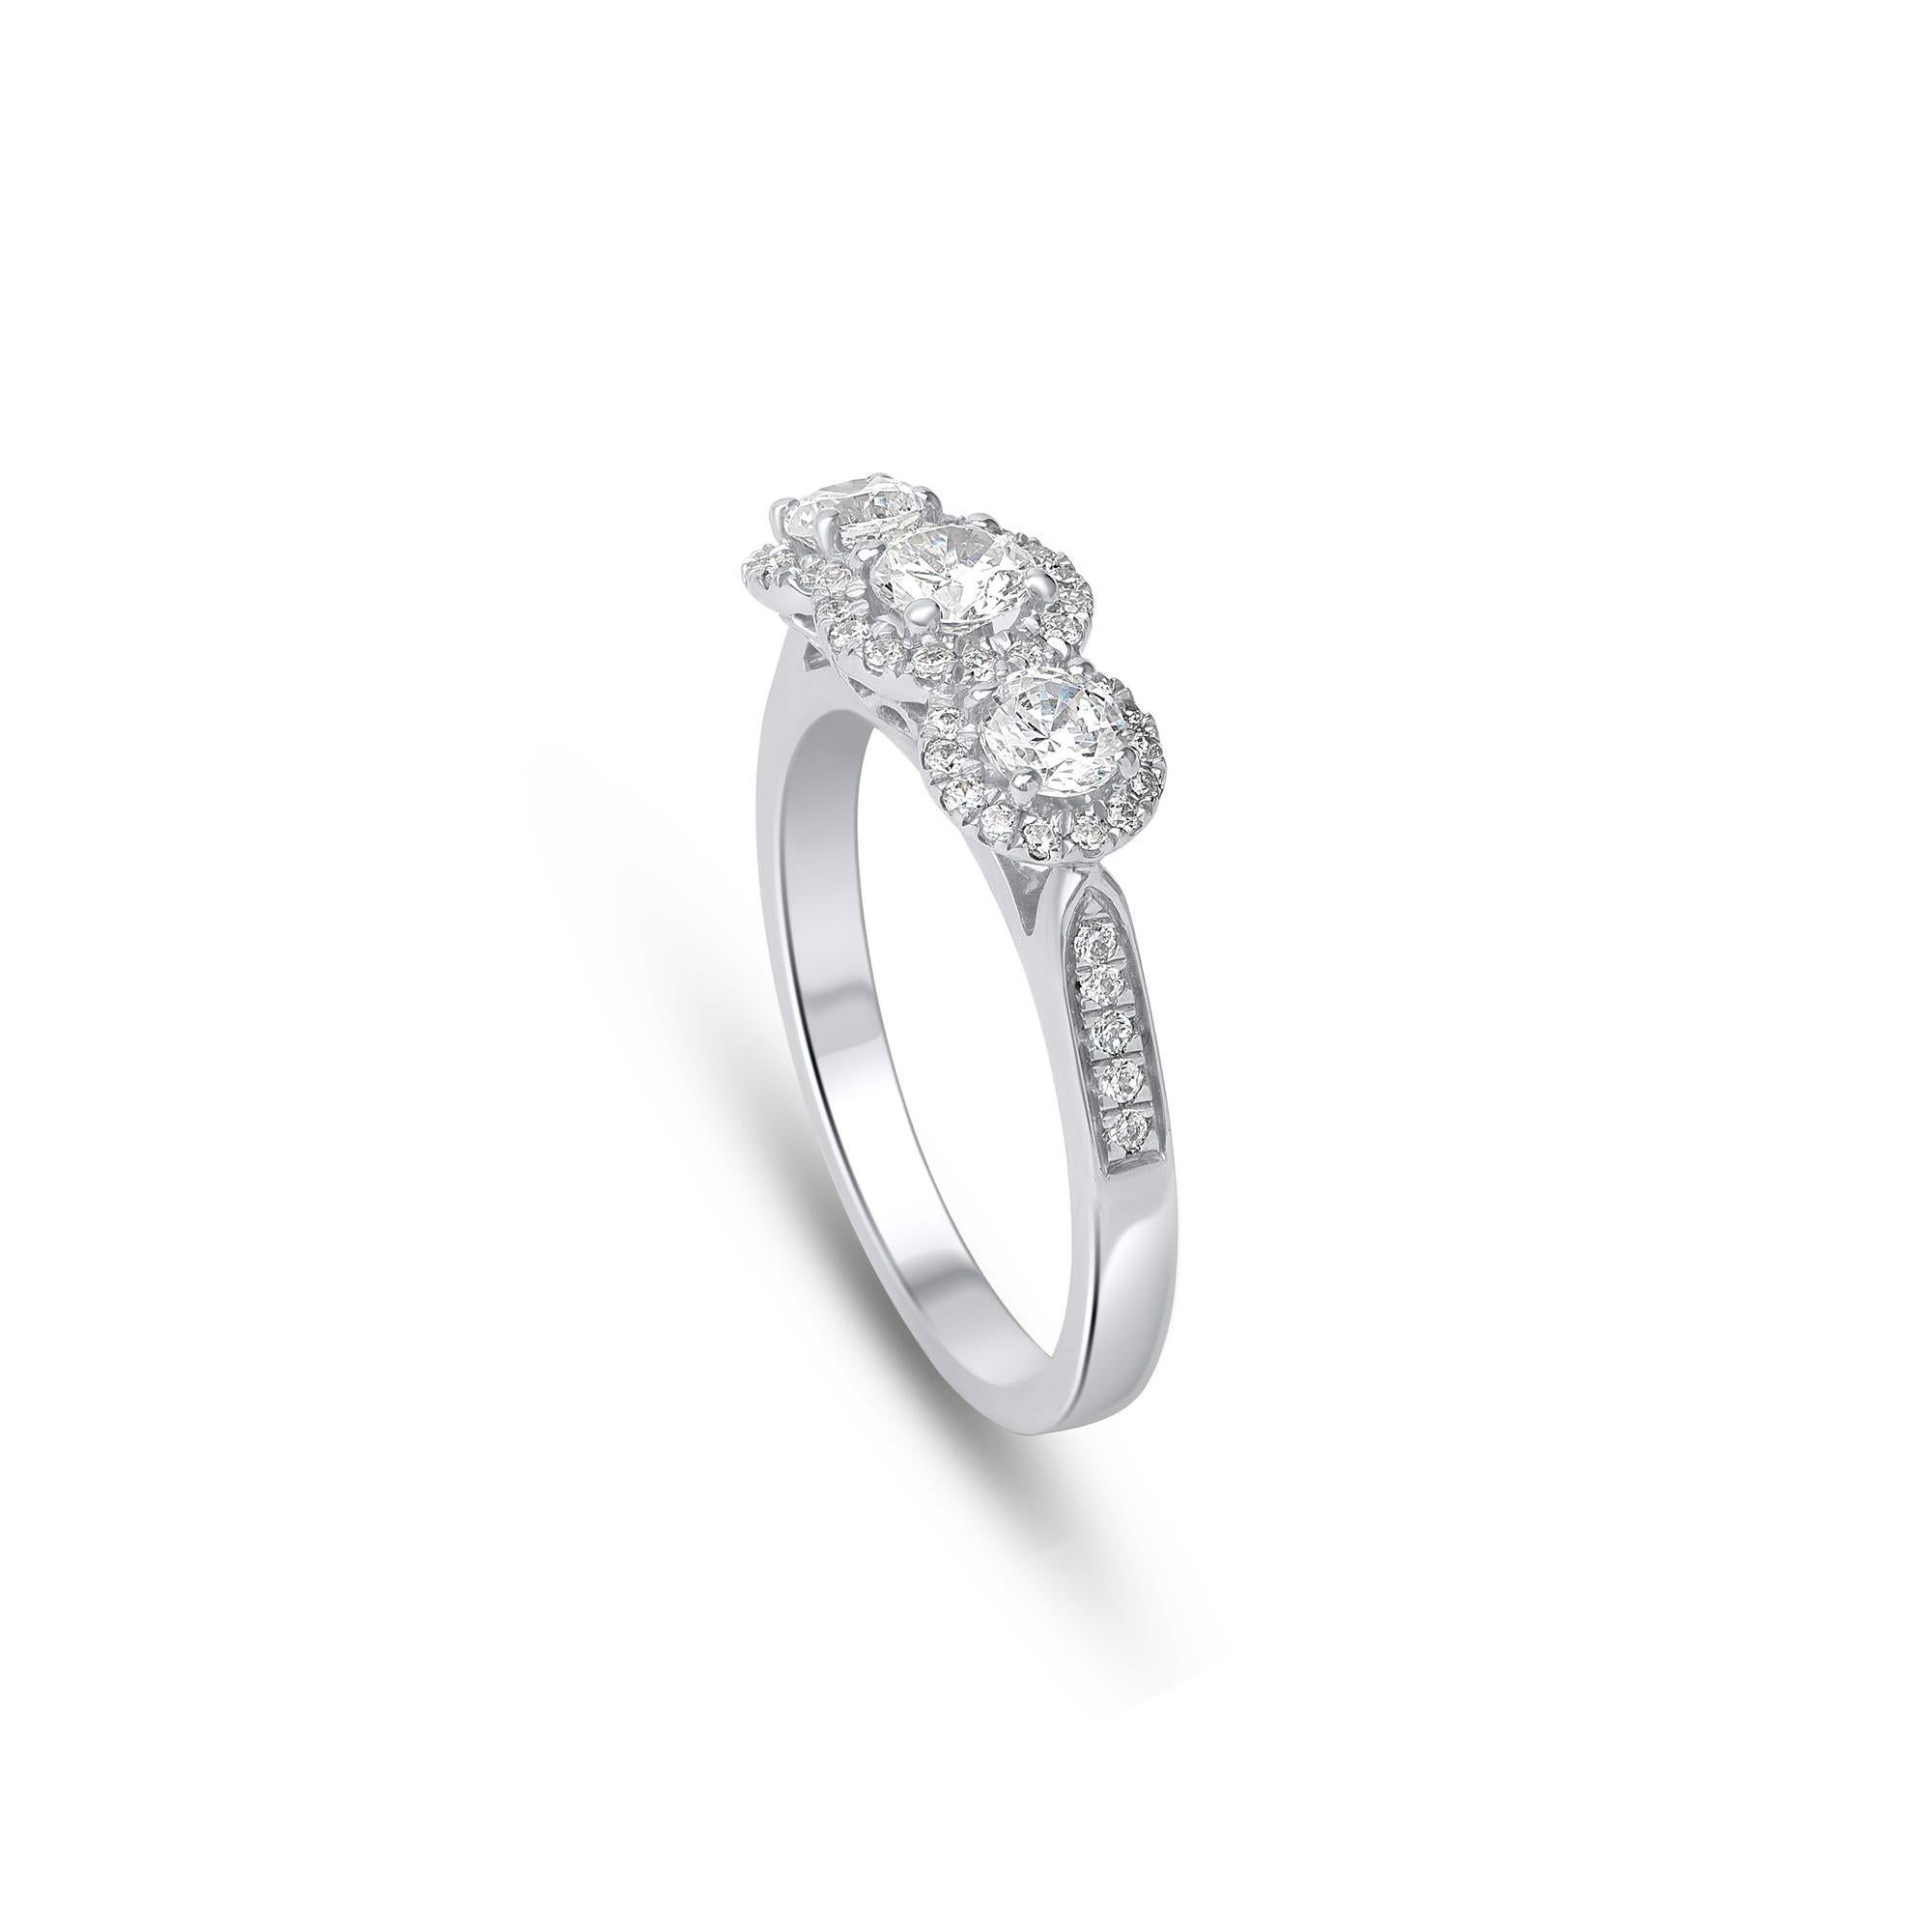 50 brilliant-cut diamonds embedded beautifully in prong and pave setting and handcrafted by our in-house experts in 18 KT white gold. Diamonds are graded H-I Color, I1 Clarity 

Metal color and ring size can be customized on request. 

This piece is